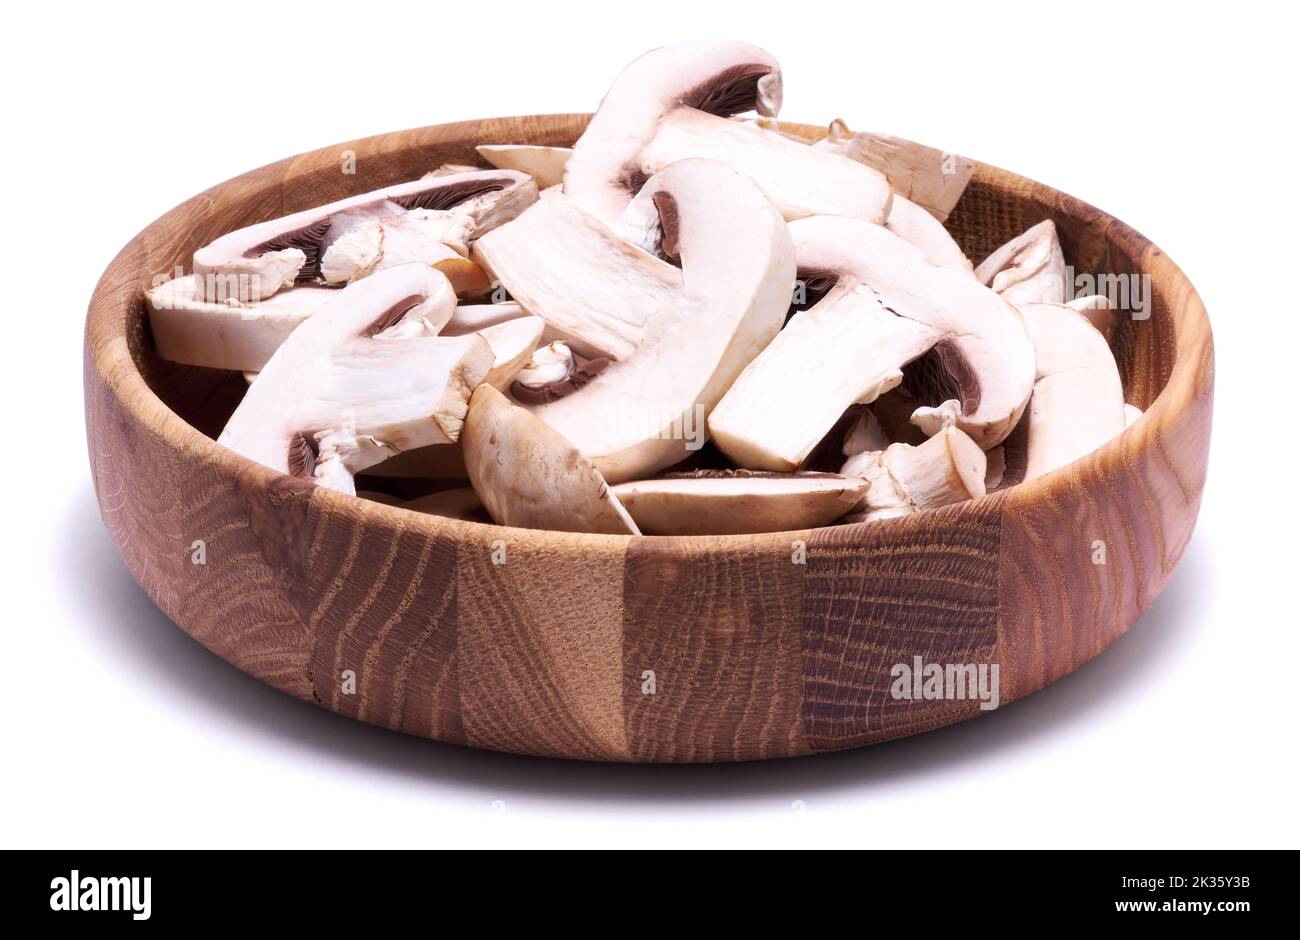 Sliced white champignon mushrooms in wooden bowl isolated on white background Stock Photo